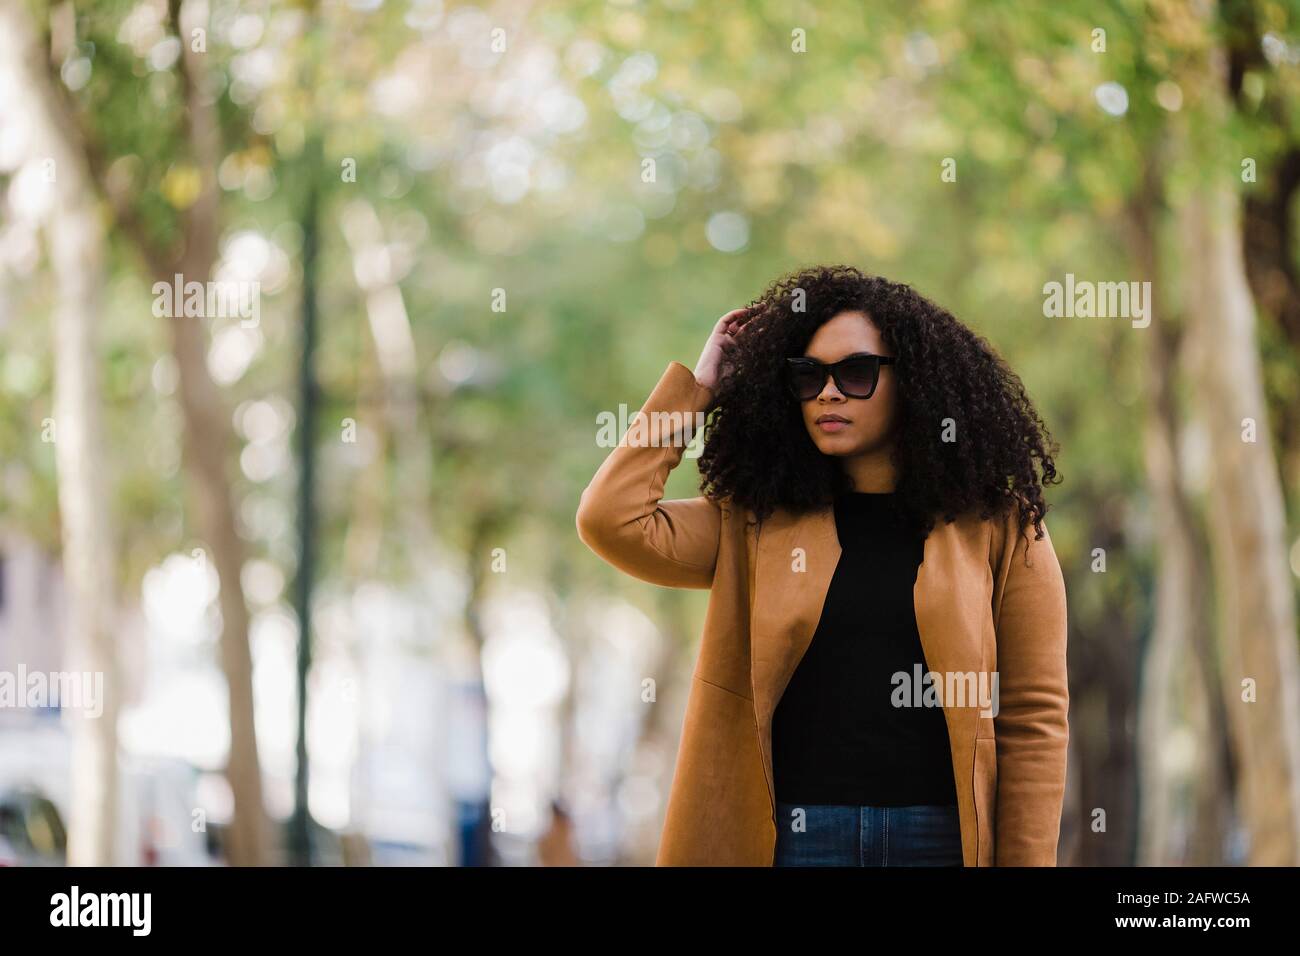 Stylish young woman in sunglasses walking in park Stock Photo